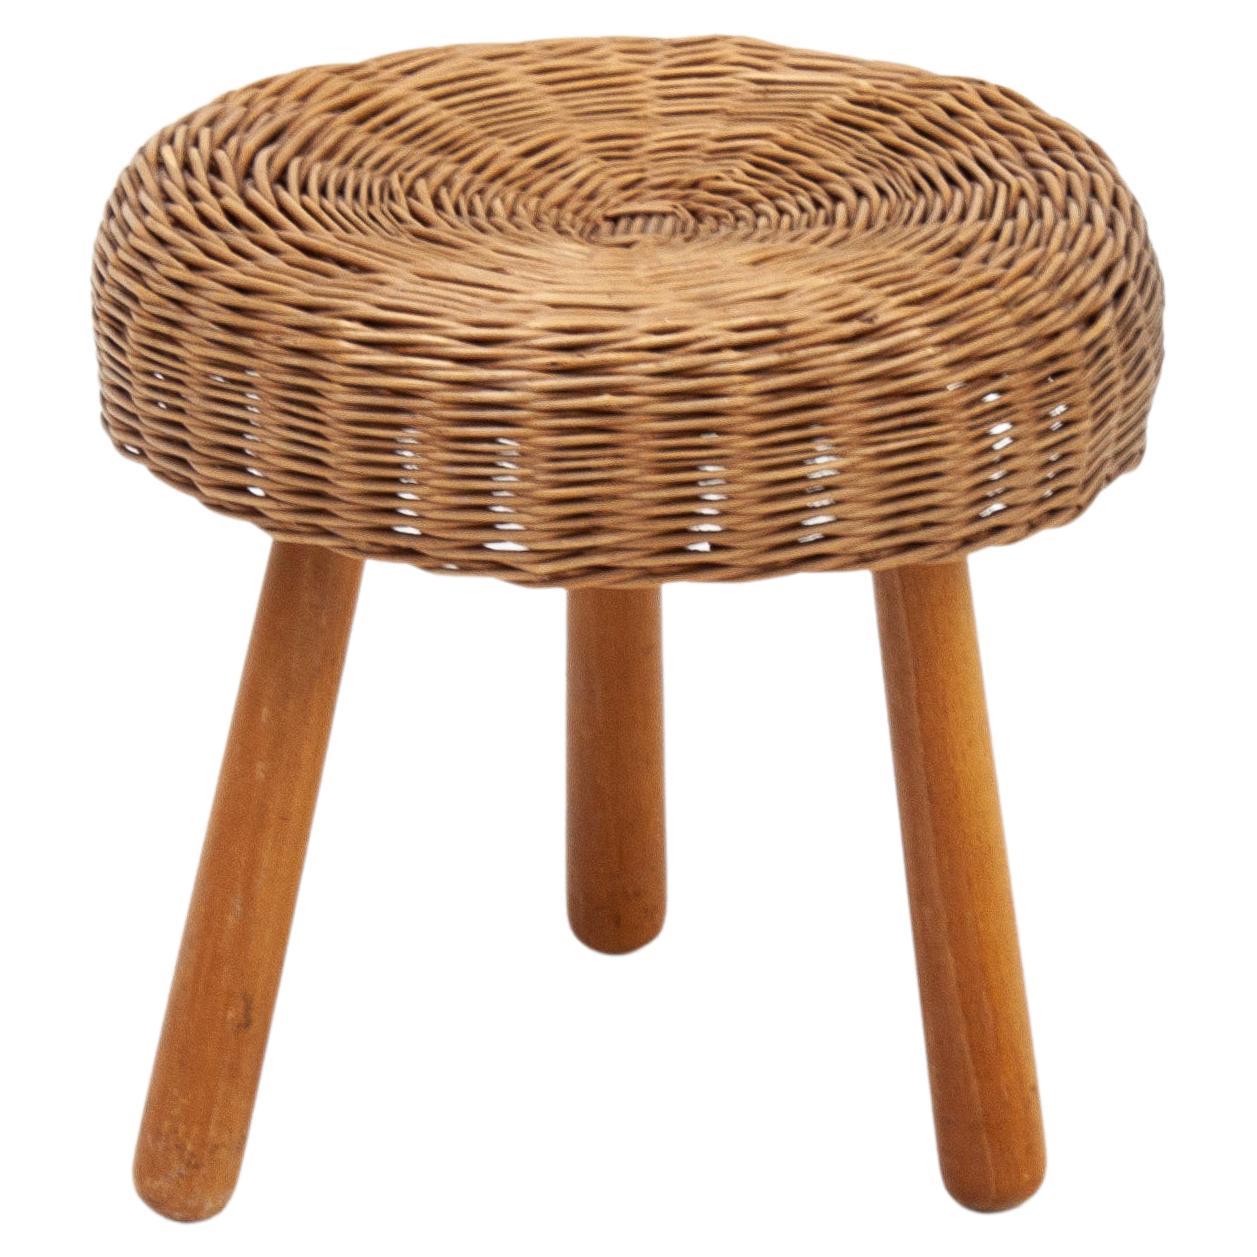 Tony Paul Attributed Wicker Stool, 1950/60s For Sale